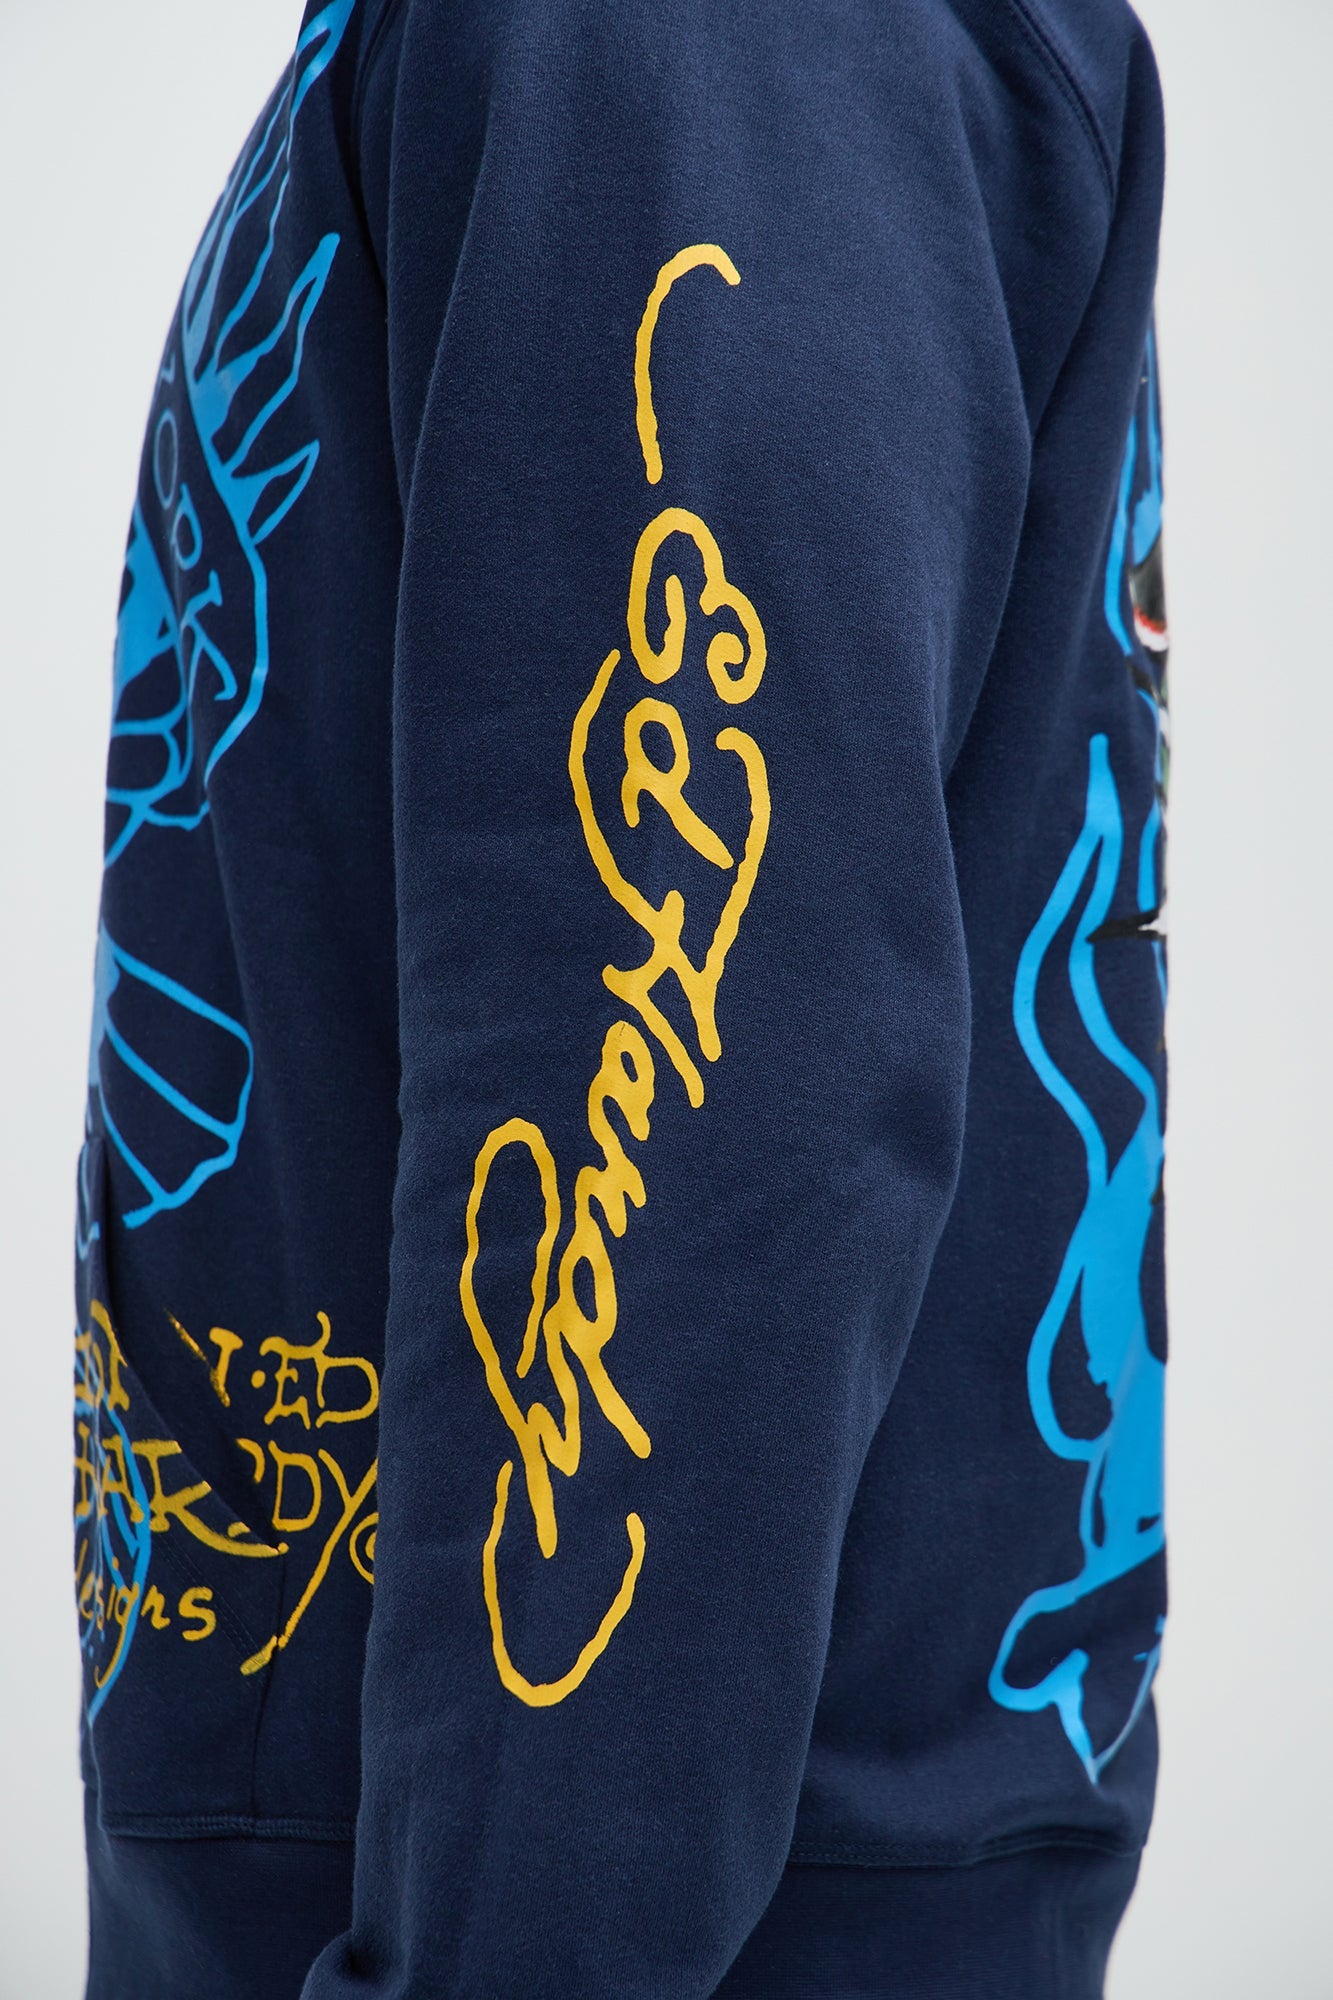 Ed Hardy Panther Bulldog Zip-Up Hoodie in Navy: A Cool, Edgy Addition to Your Wardrobe